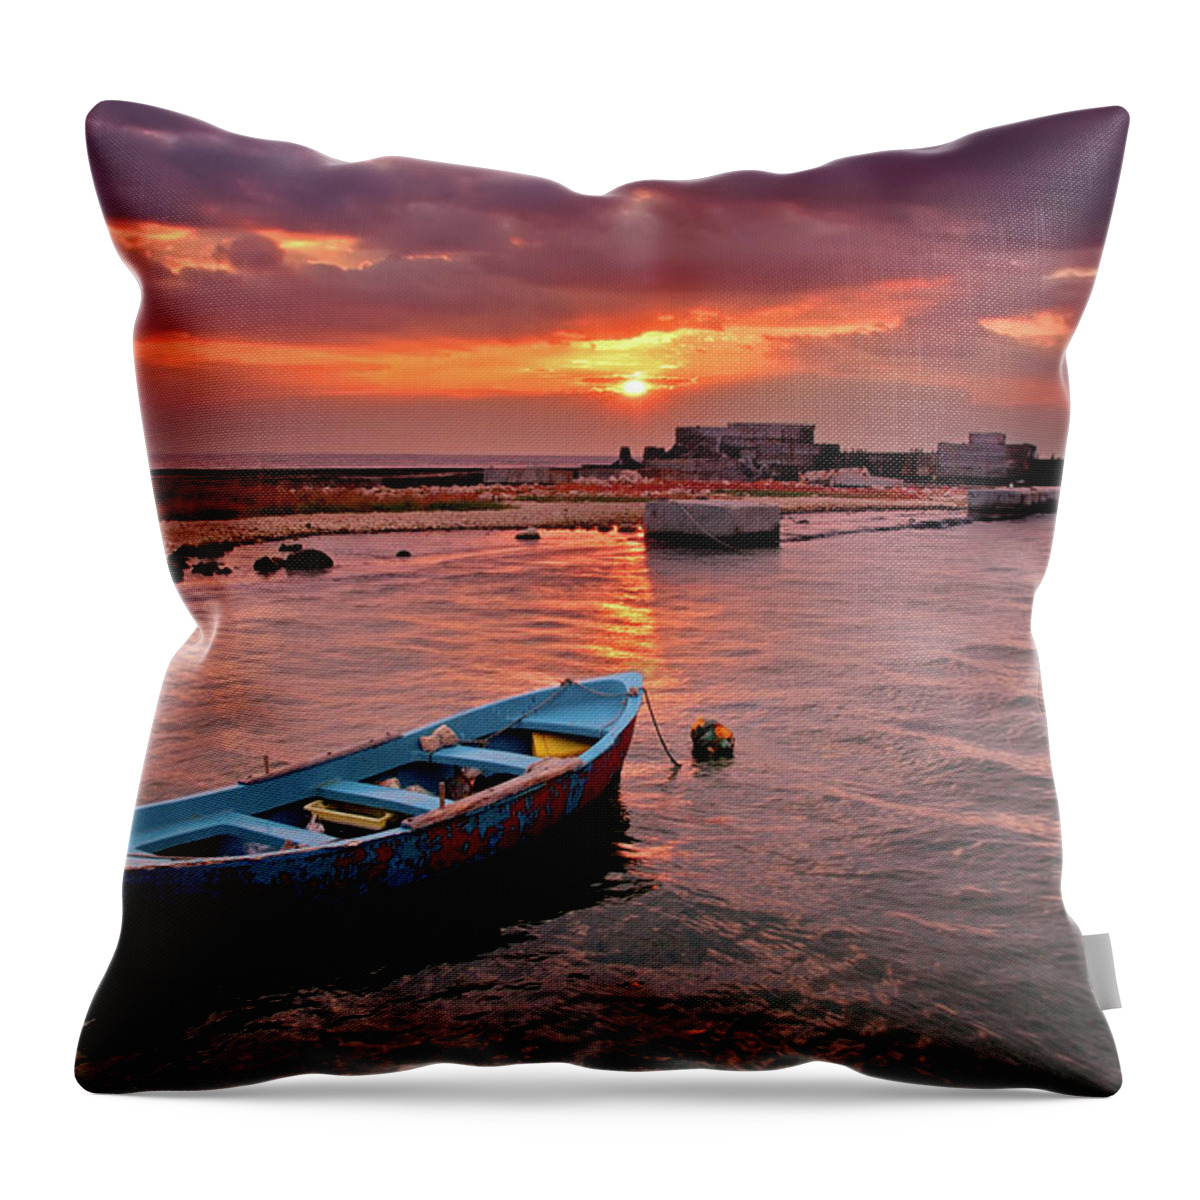 Bulgaria Throw Pillow featuring the photograph Nature Bulgaria Blue Boat Sunrise by Mchen007